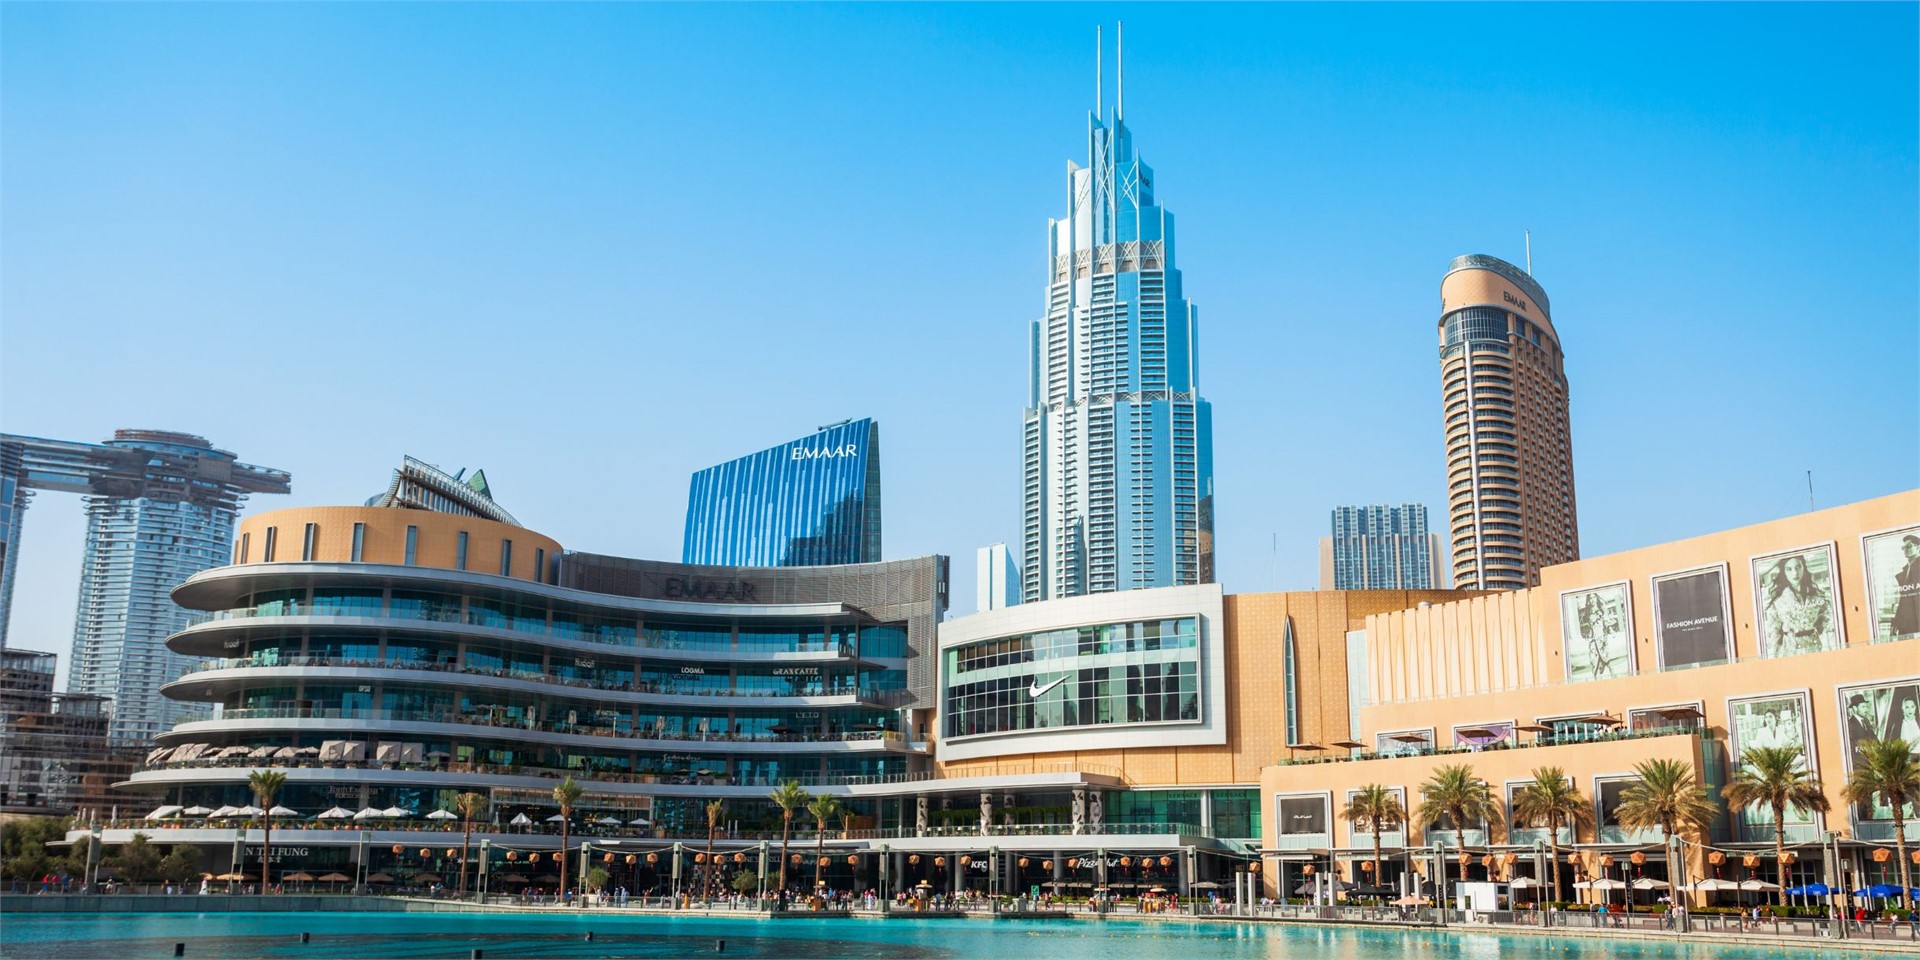 Book your trip to the Shopping Festival in Dubai
